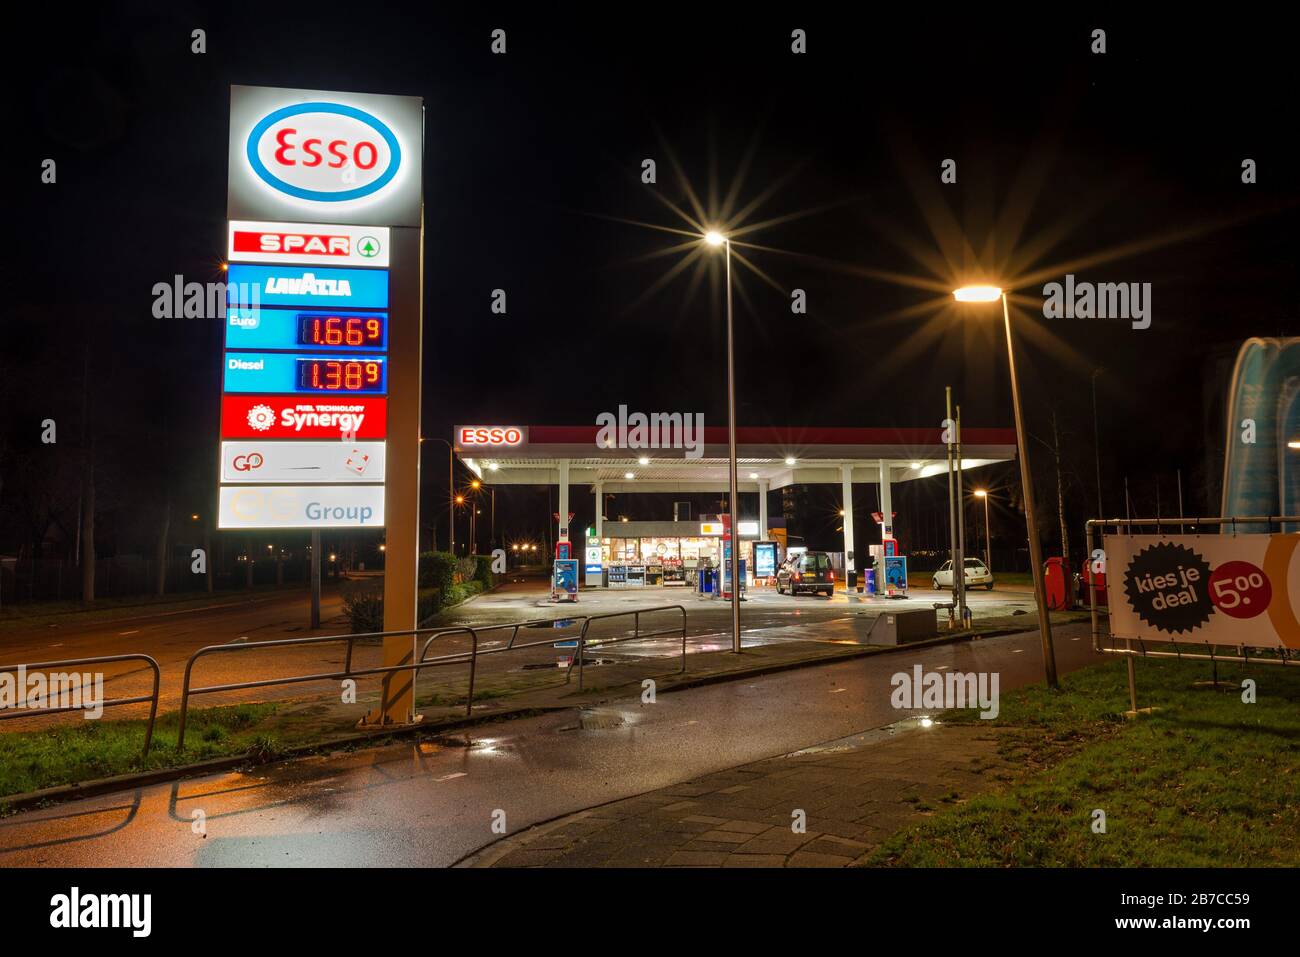 Esso (Exxon Mobile) gas station and store at night Stock Photo